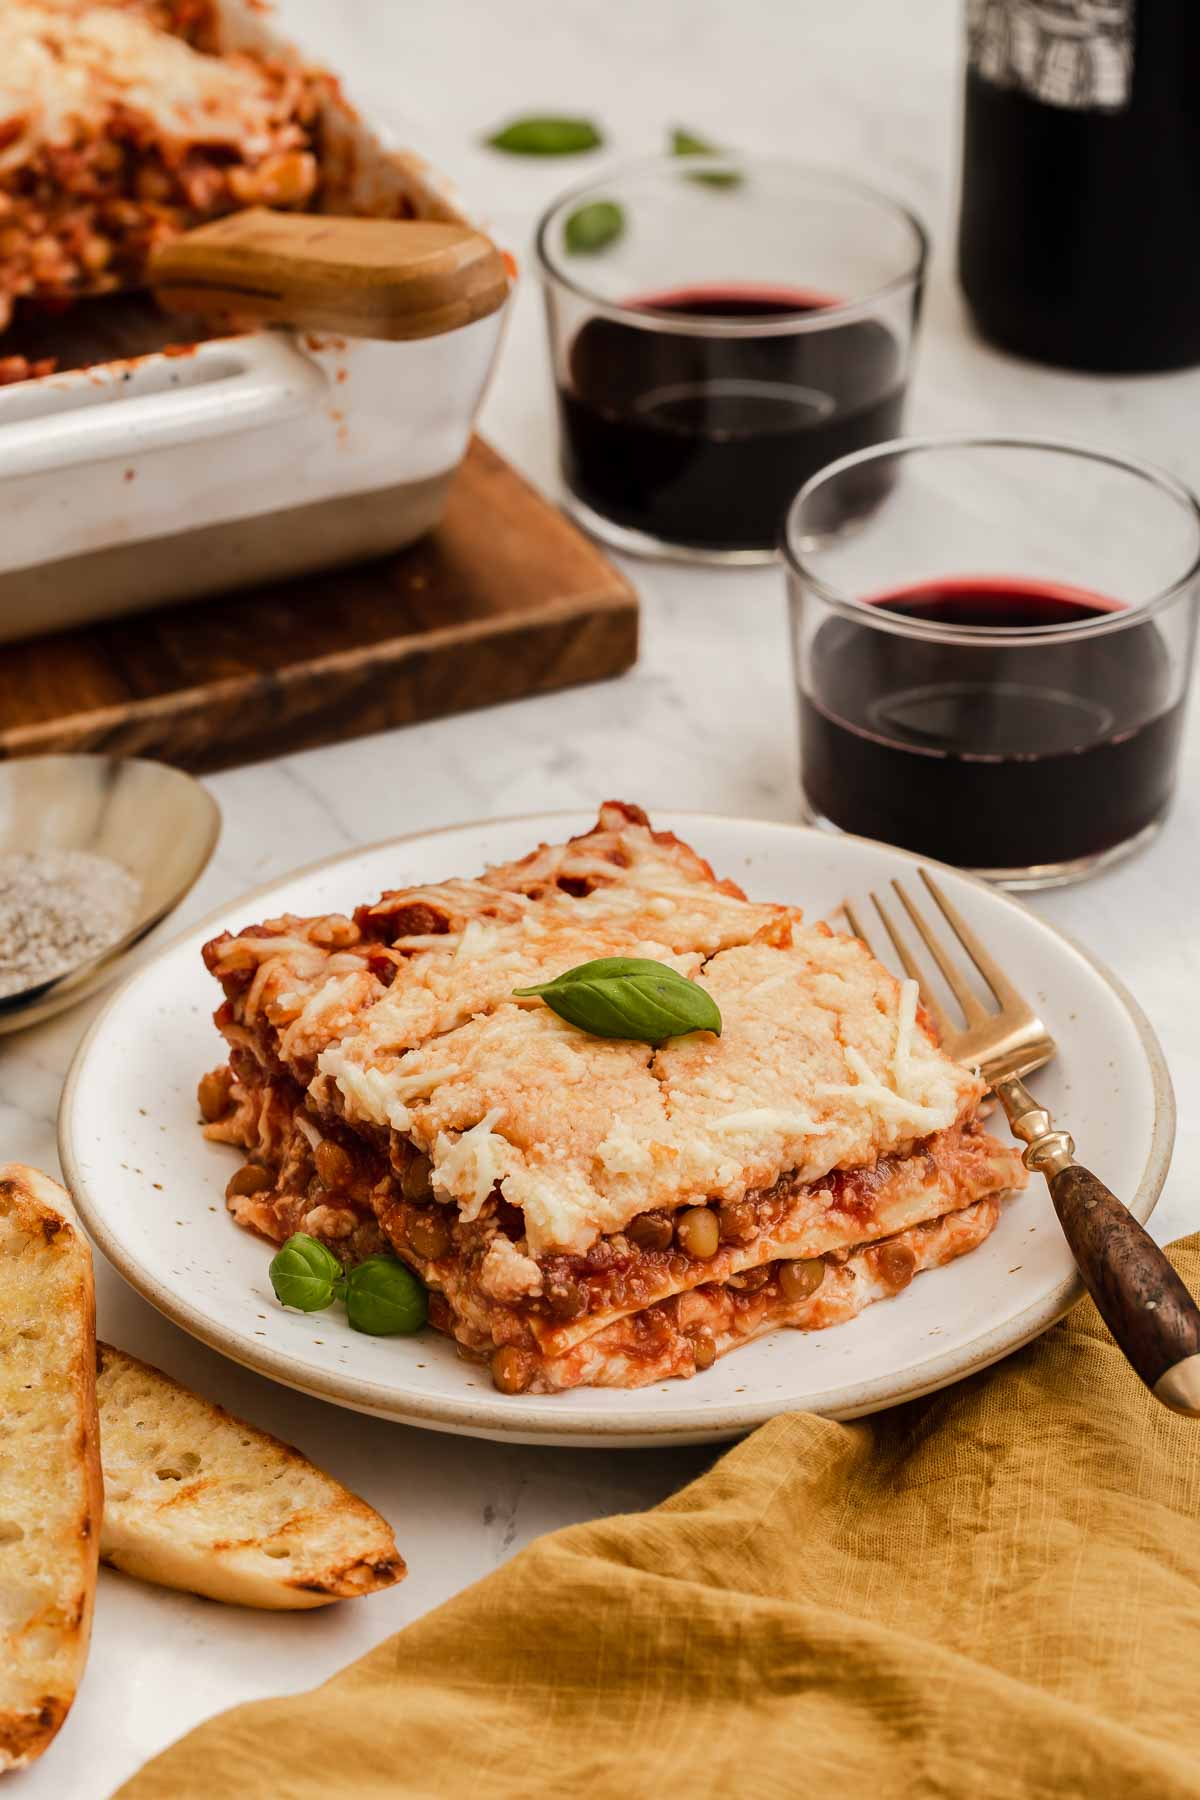 Square slice of lentil lasagna on plate with casserole and red wine behind.